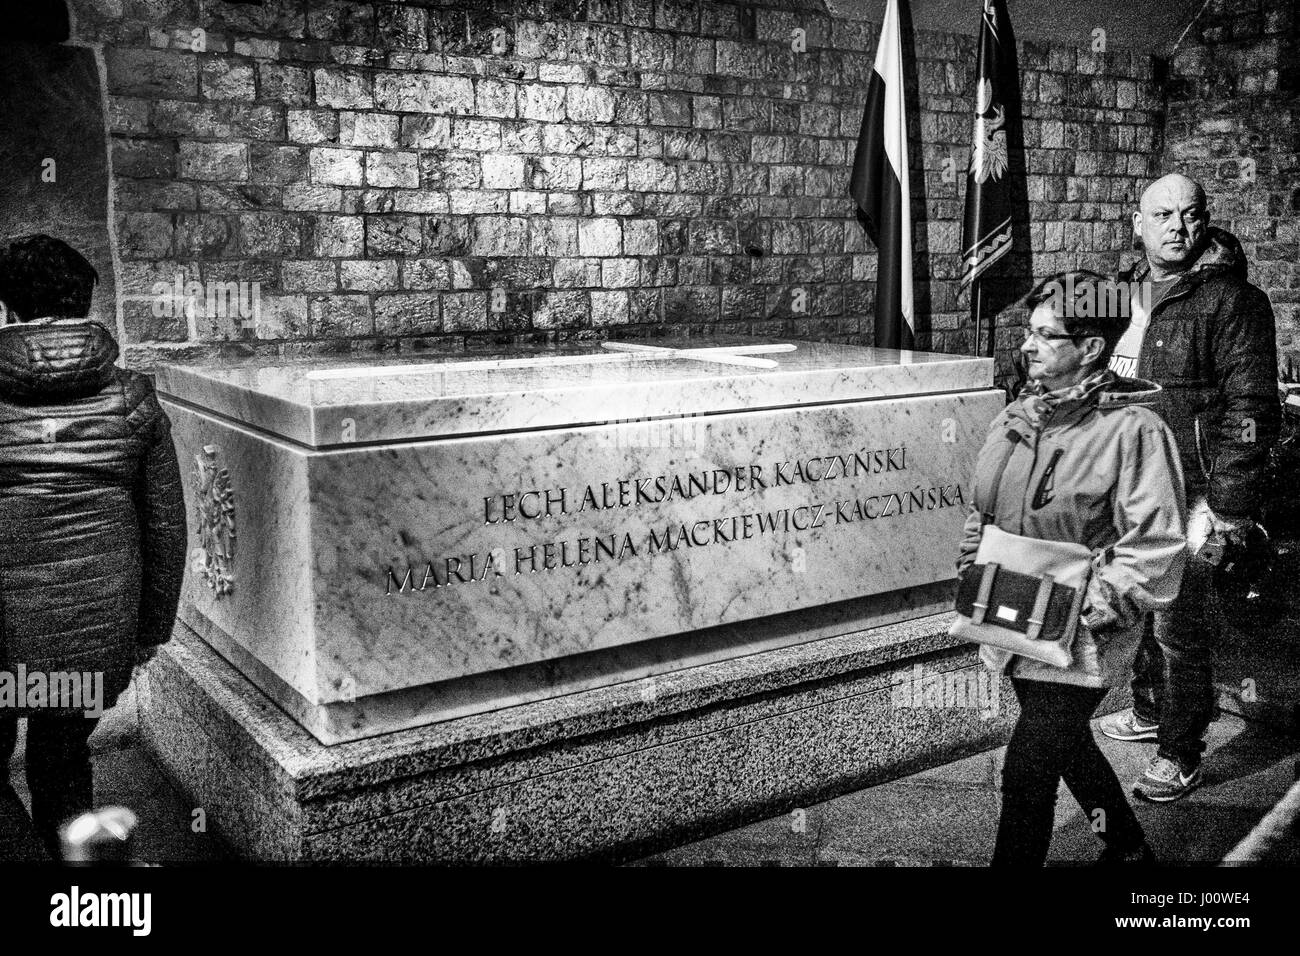 Krakow, Poland. 8th Apr, 2017. Thumb, sarcophagus, of Lech Kaczynski, Polish President in the antechamber of the Crypt Under the Tower of Silver Bells beneath the Wawel Cathedral in Krakow, Poland on 08.04.2017 Kaczynski died in the crash of a Polish Air Force jet that occurred on a landing attempt at Smolensk-North airport in Russia on 11th April 2010. by Wiktor Dabkowski Credit: Wiktor Dabkowski/ZUMA Wire/Alamy Live News Stock Photo